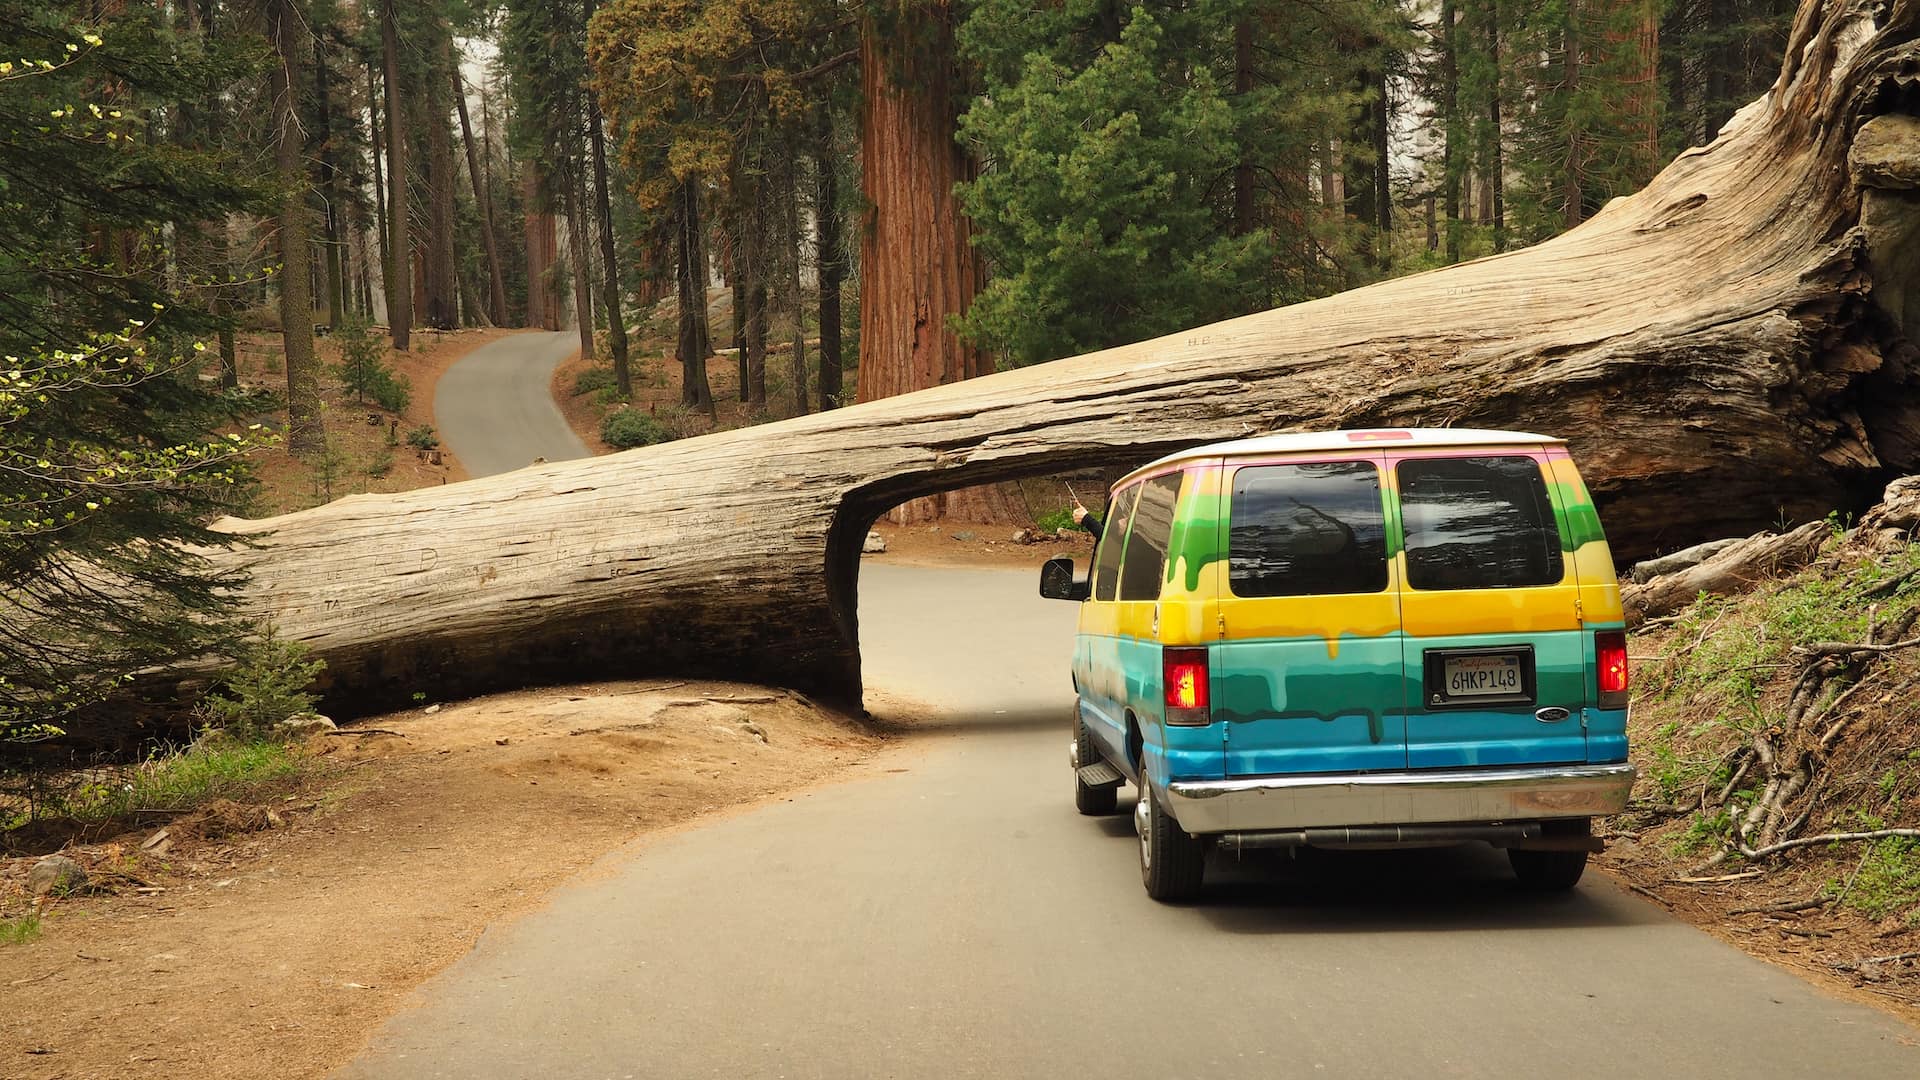 A multi-coloured van is parked in front of a fallen tree across the road, with a tunnel carved through its trunk